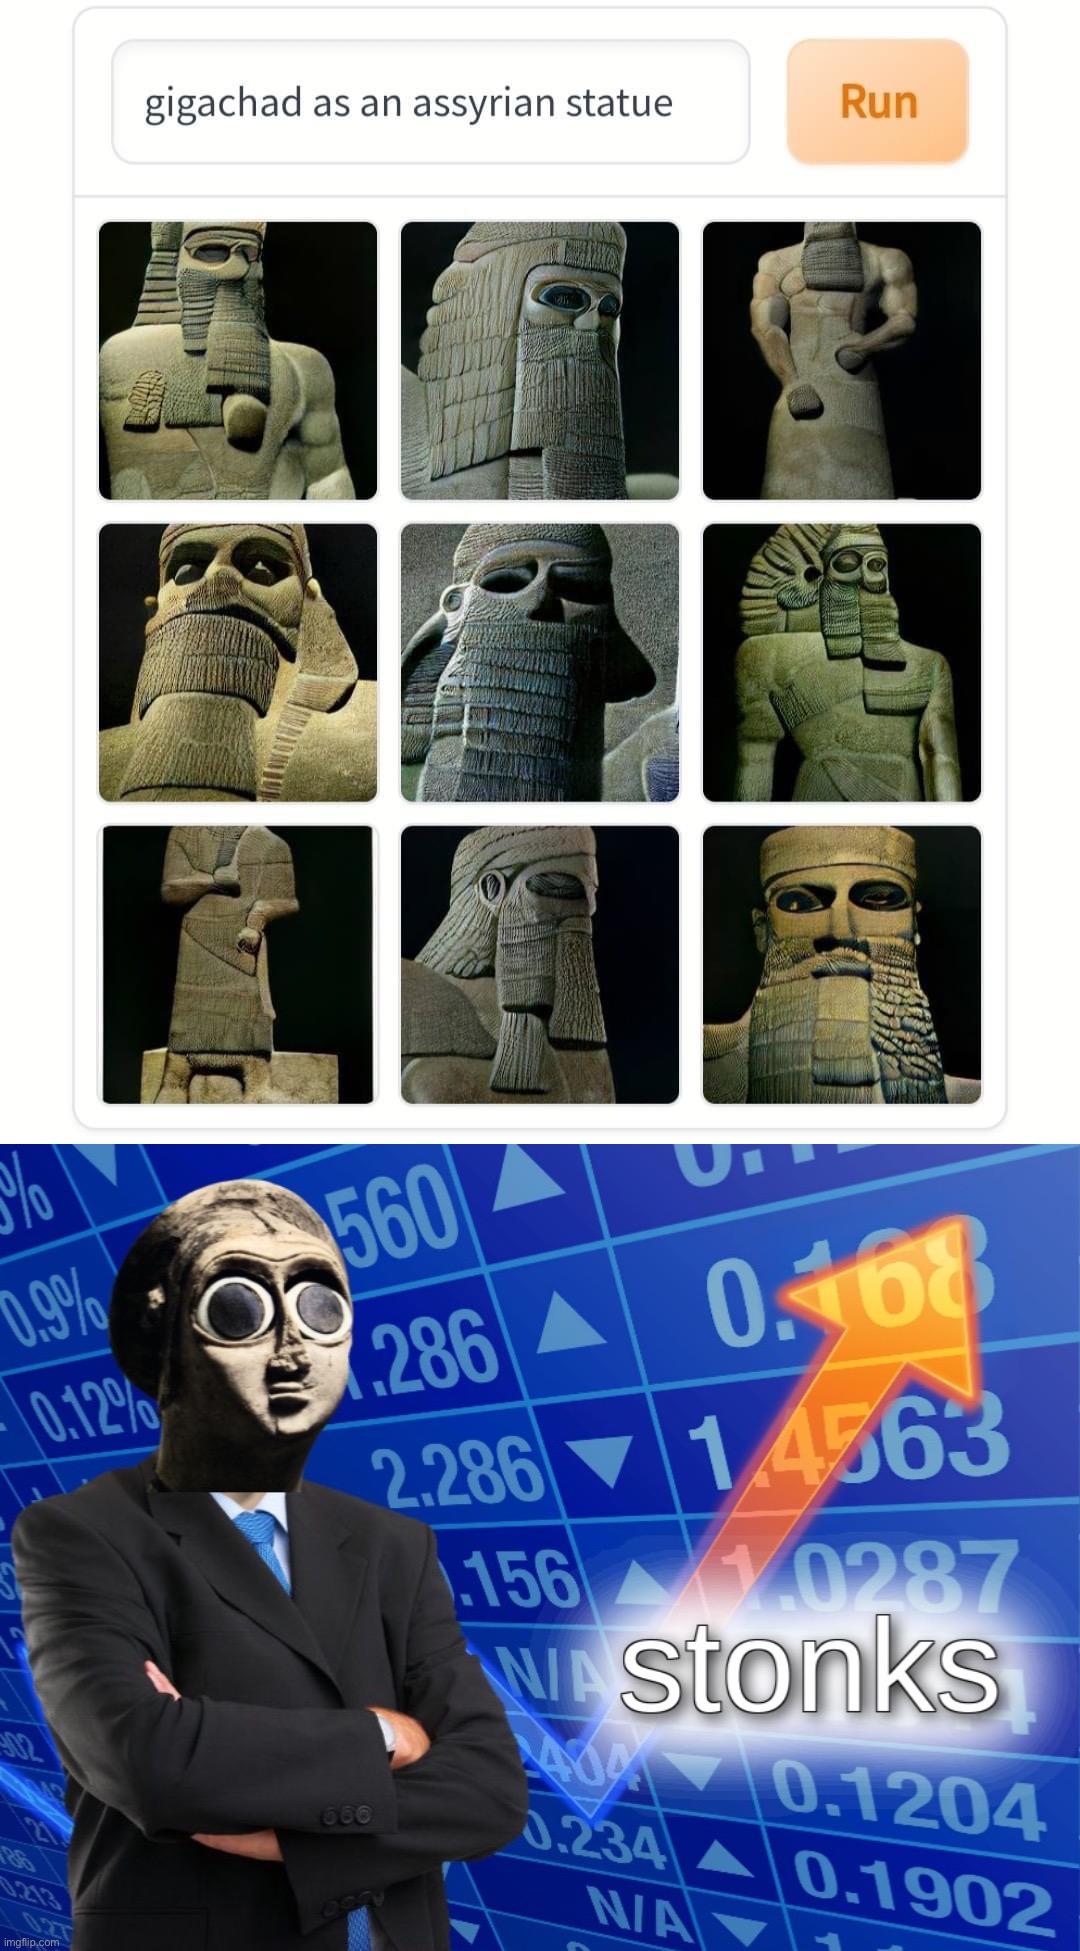 Sumerian stonks | image tagged in gigachad as an assyrian statue,sumerian stonks,stonks,gigachad,chad,statue | made w/ Imgflip meme maker